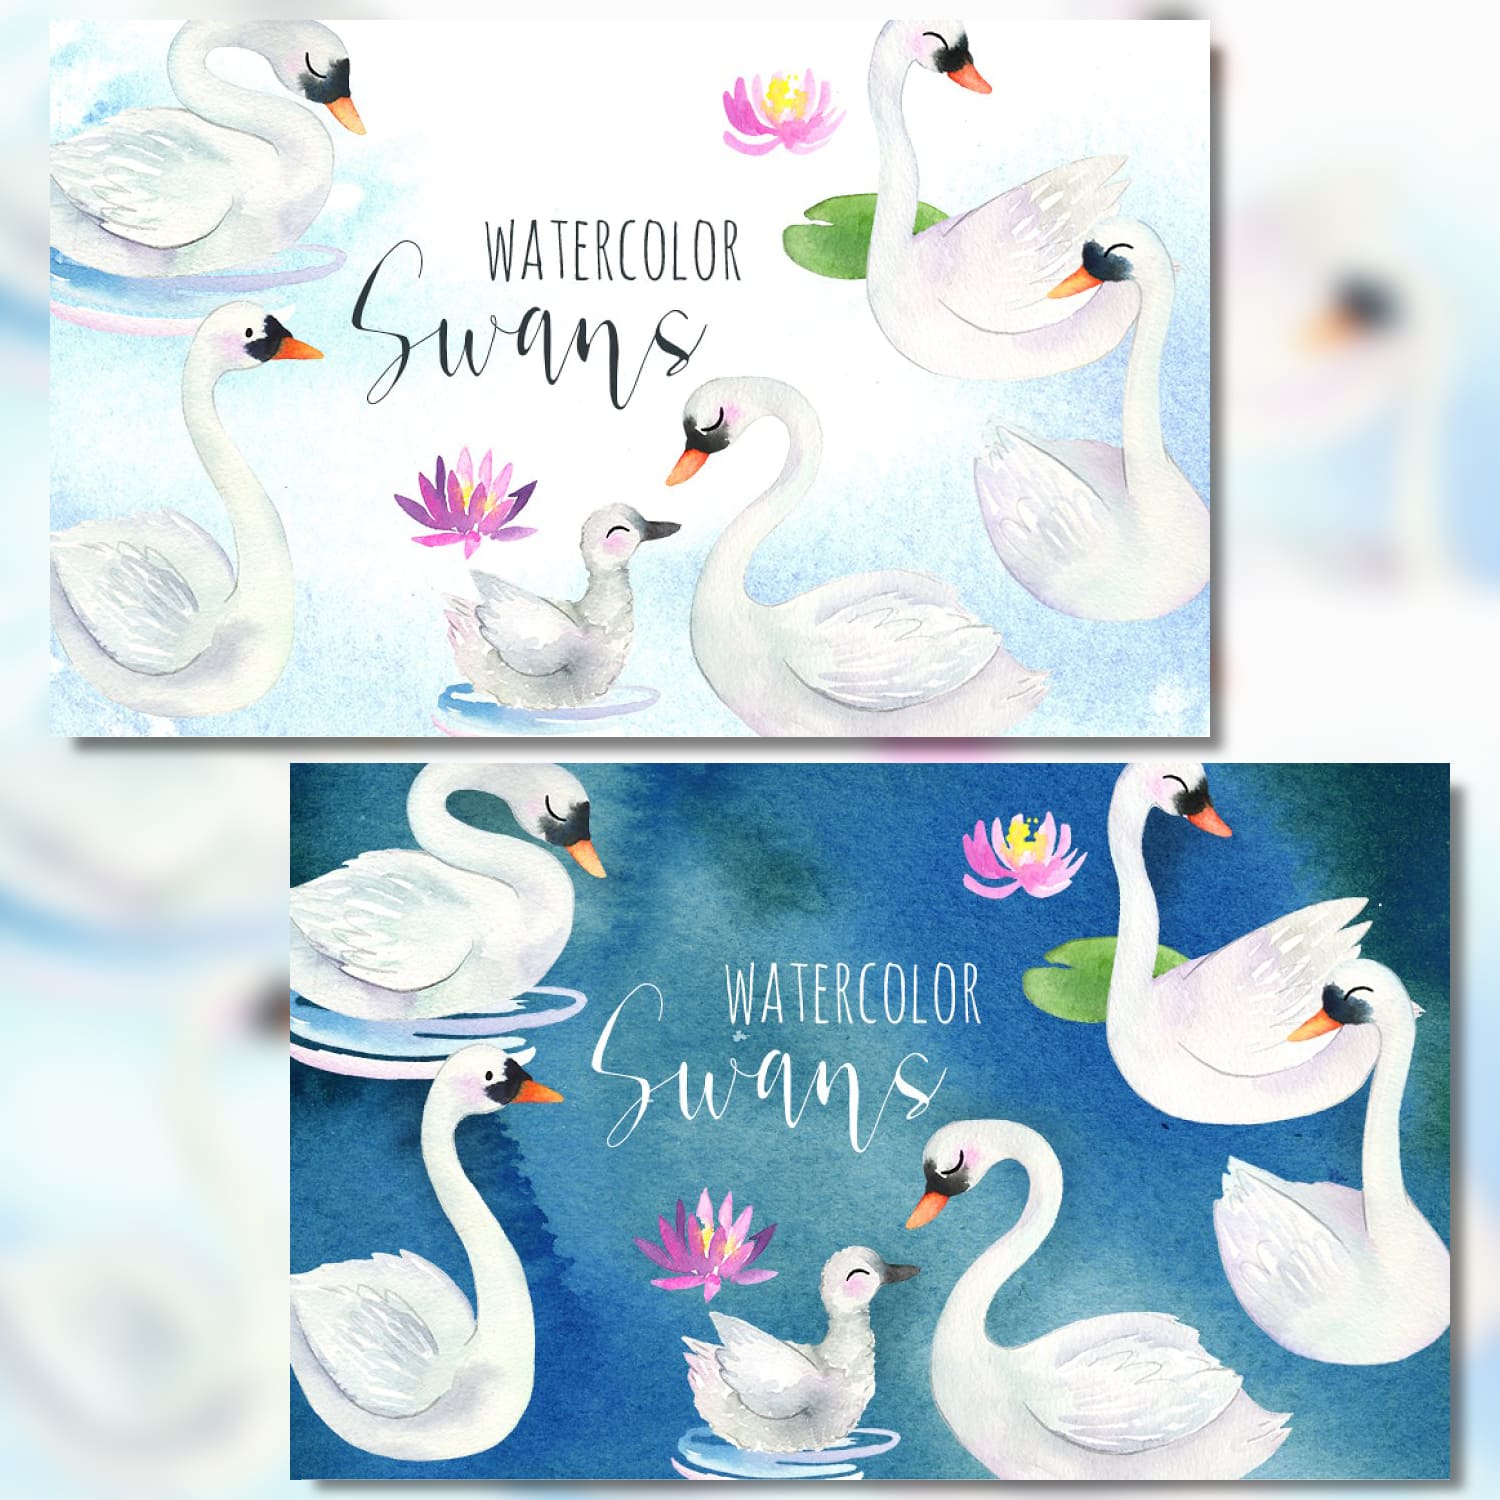 Watercolor Swans Pack cover.